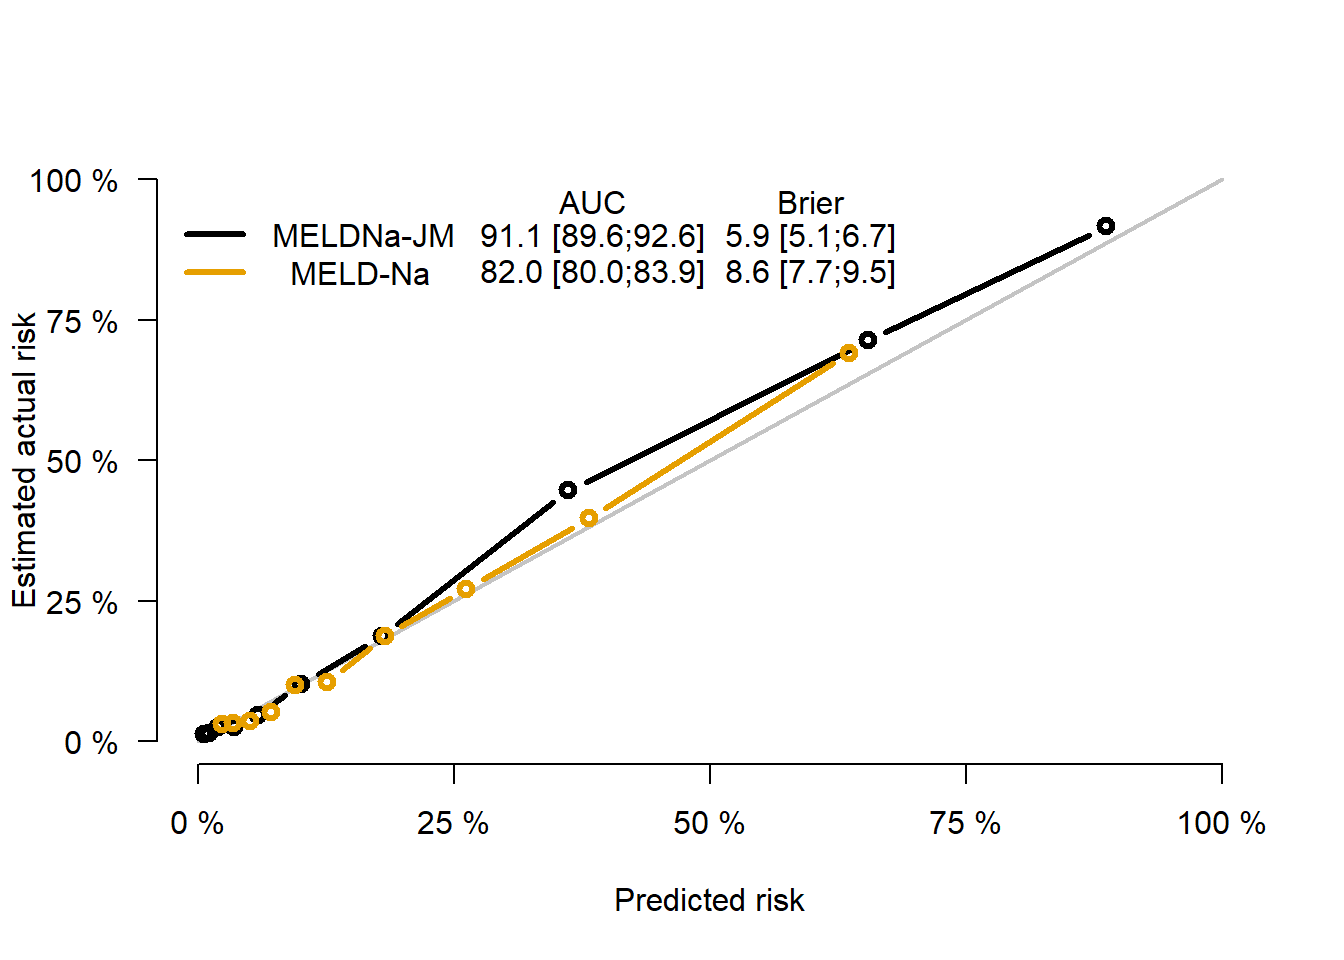 Performance measures for the MELDNa-JM and MELD-Na.